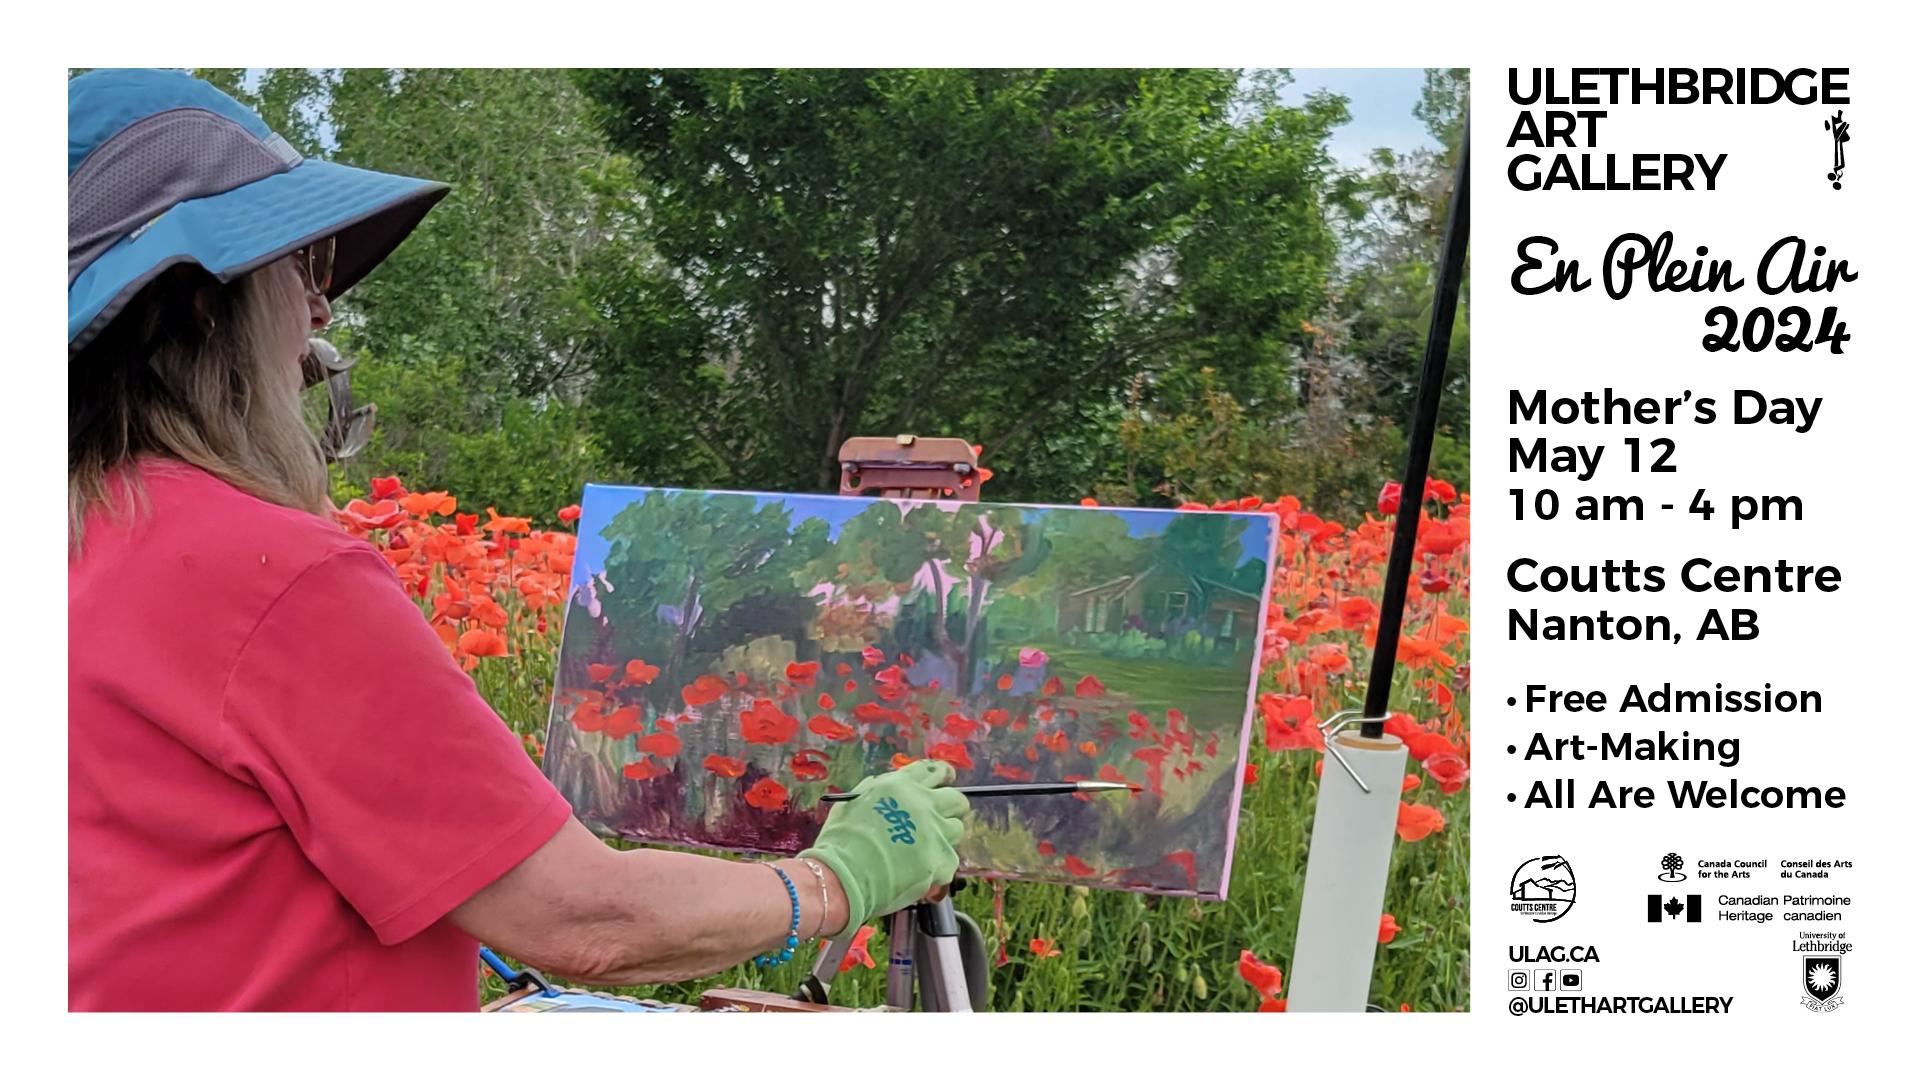 A seated artist wearing a red shirt, blue hat and green gloves, holding a small paint brush. Artist is working on a landscape painting with red poppies in the foreground, deciduous trees in the middle ground and a building in the background.